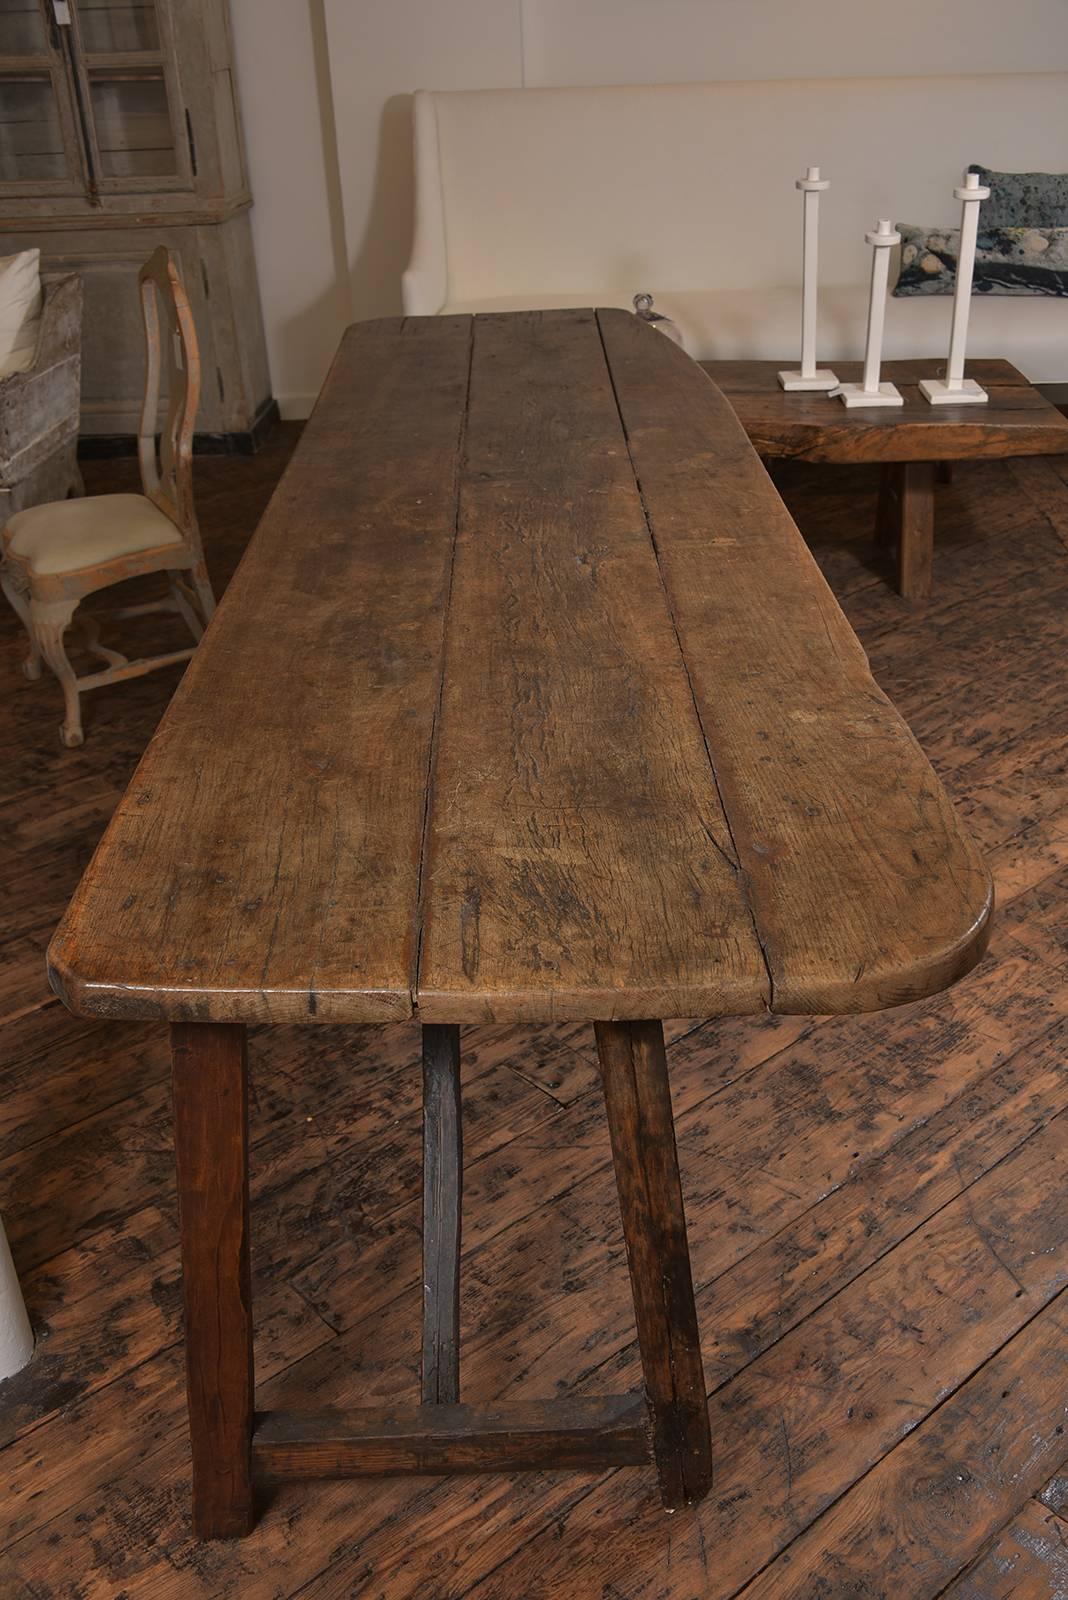 Fabulous, grand scale Spanish 18th century walnut table. Could be a fabulous console or dining table. Great old patina and age.